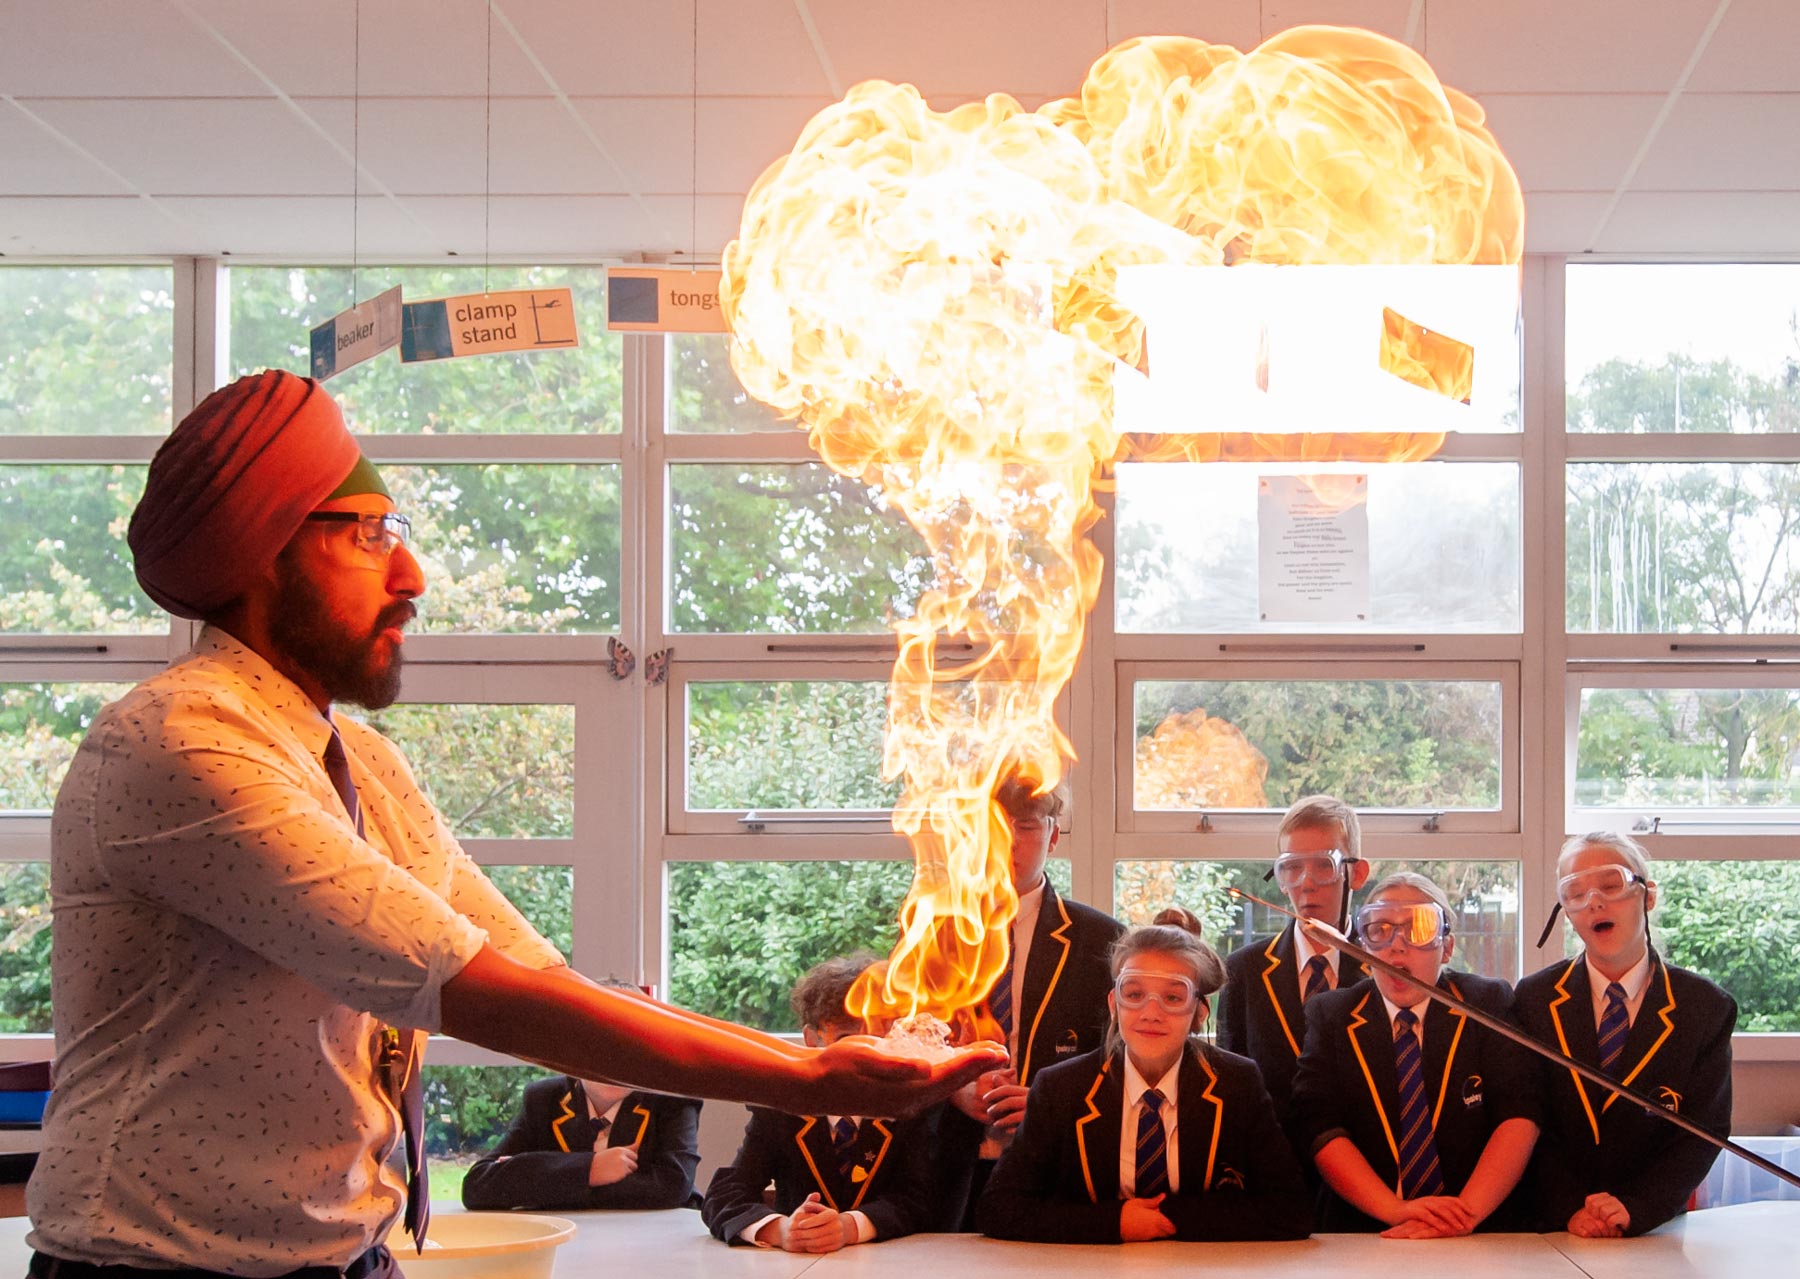 Creatice school website and prospectus photography of methane bubble demonstration in the classroom